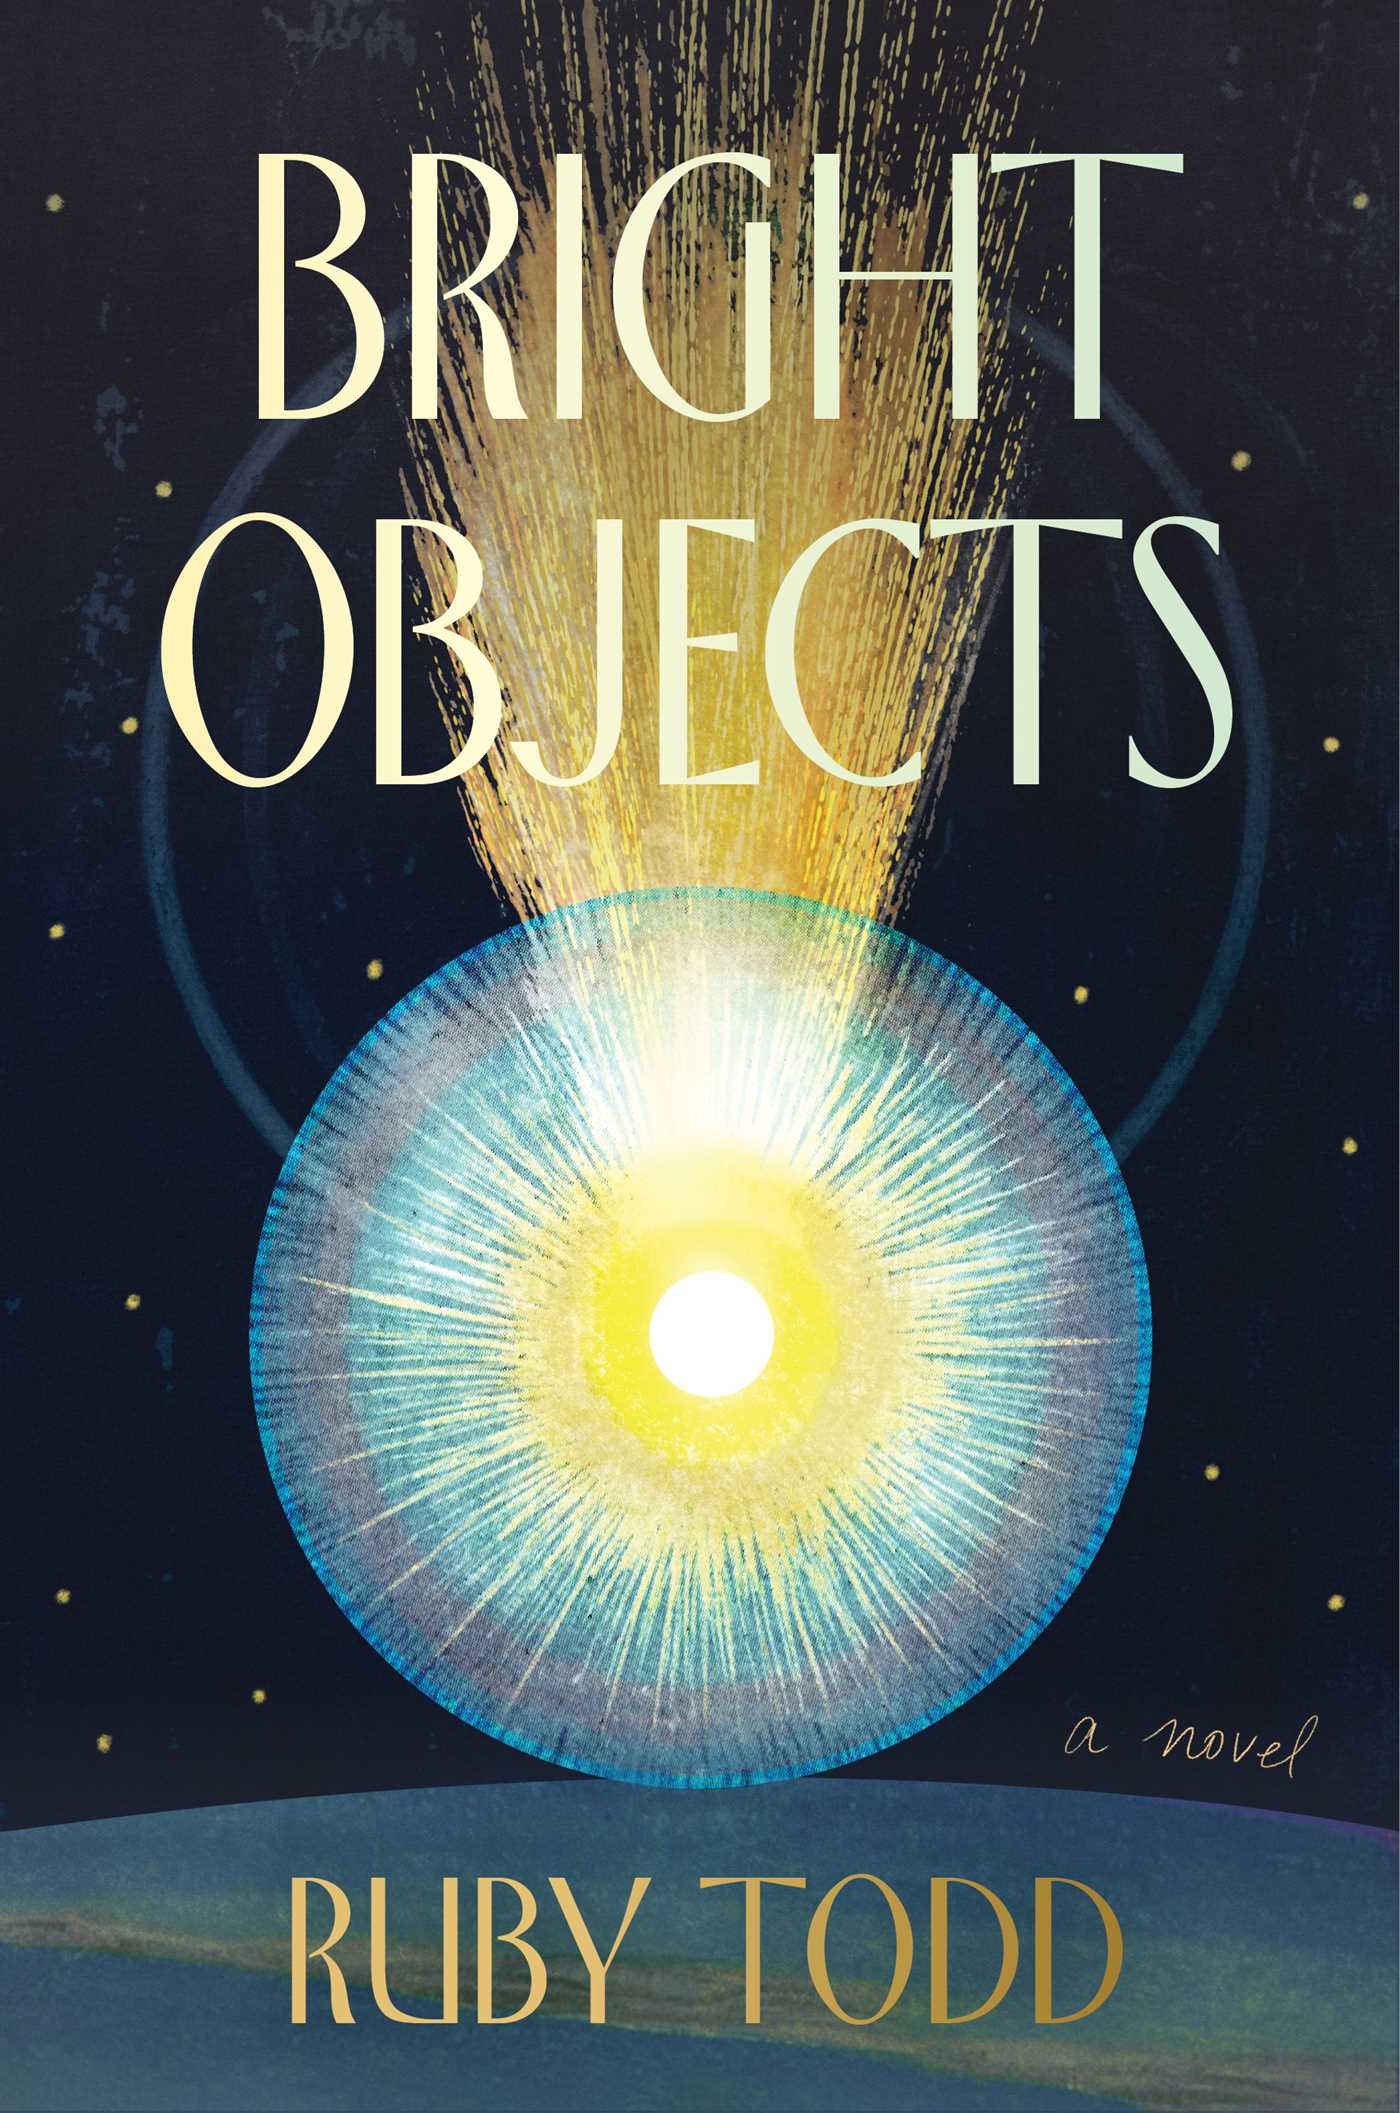 BRIGHT OBJECTS